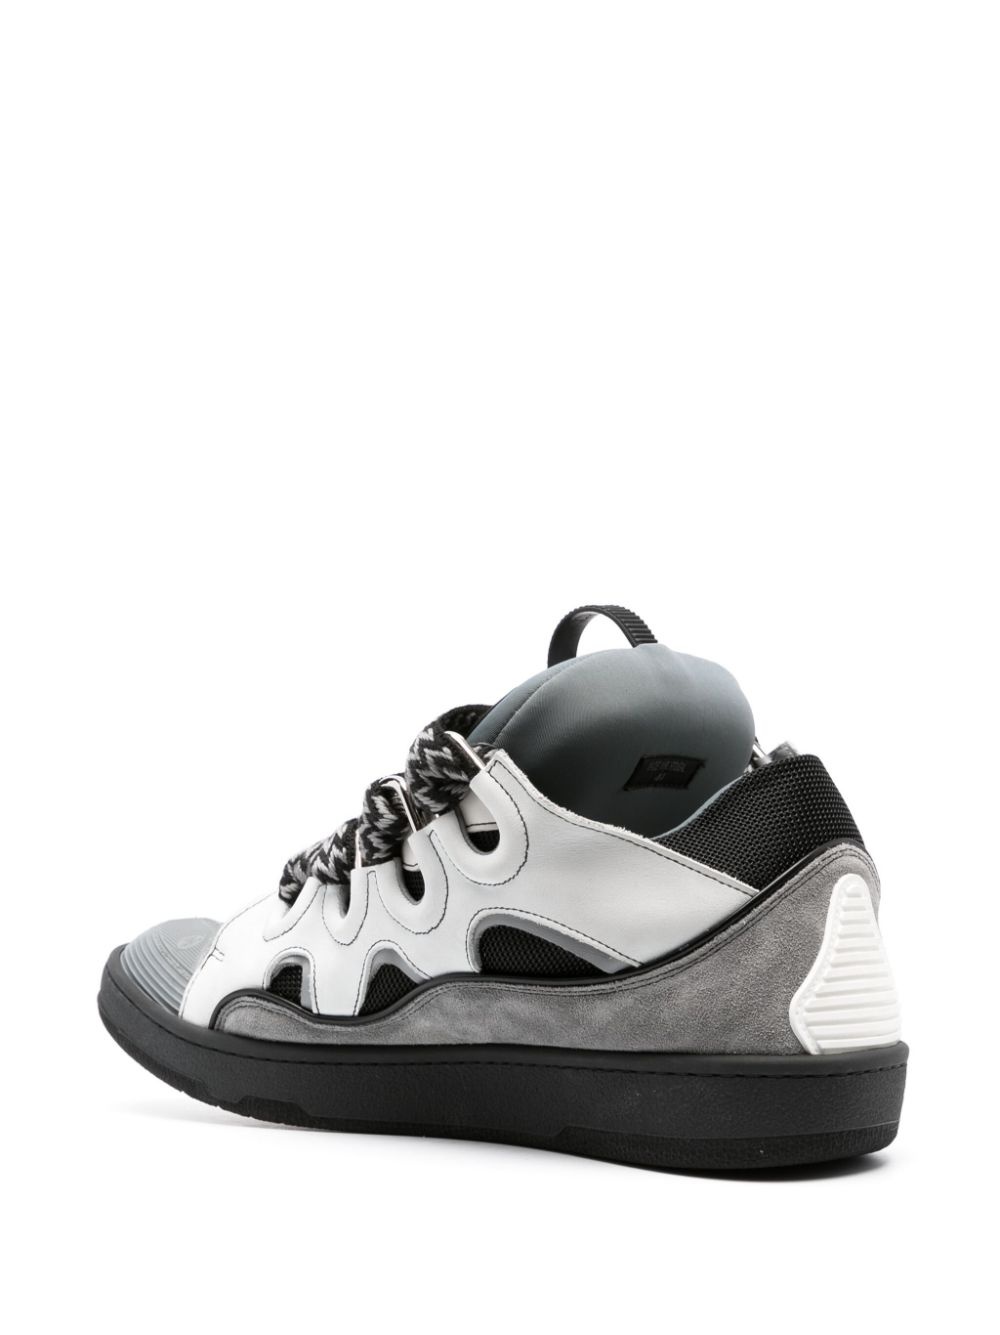 Curb leather sneakers - 3